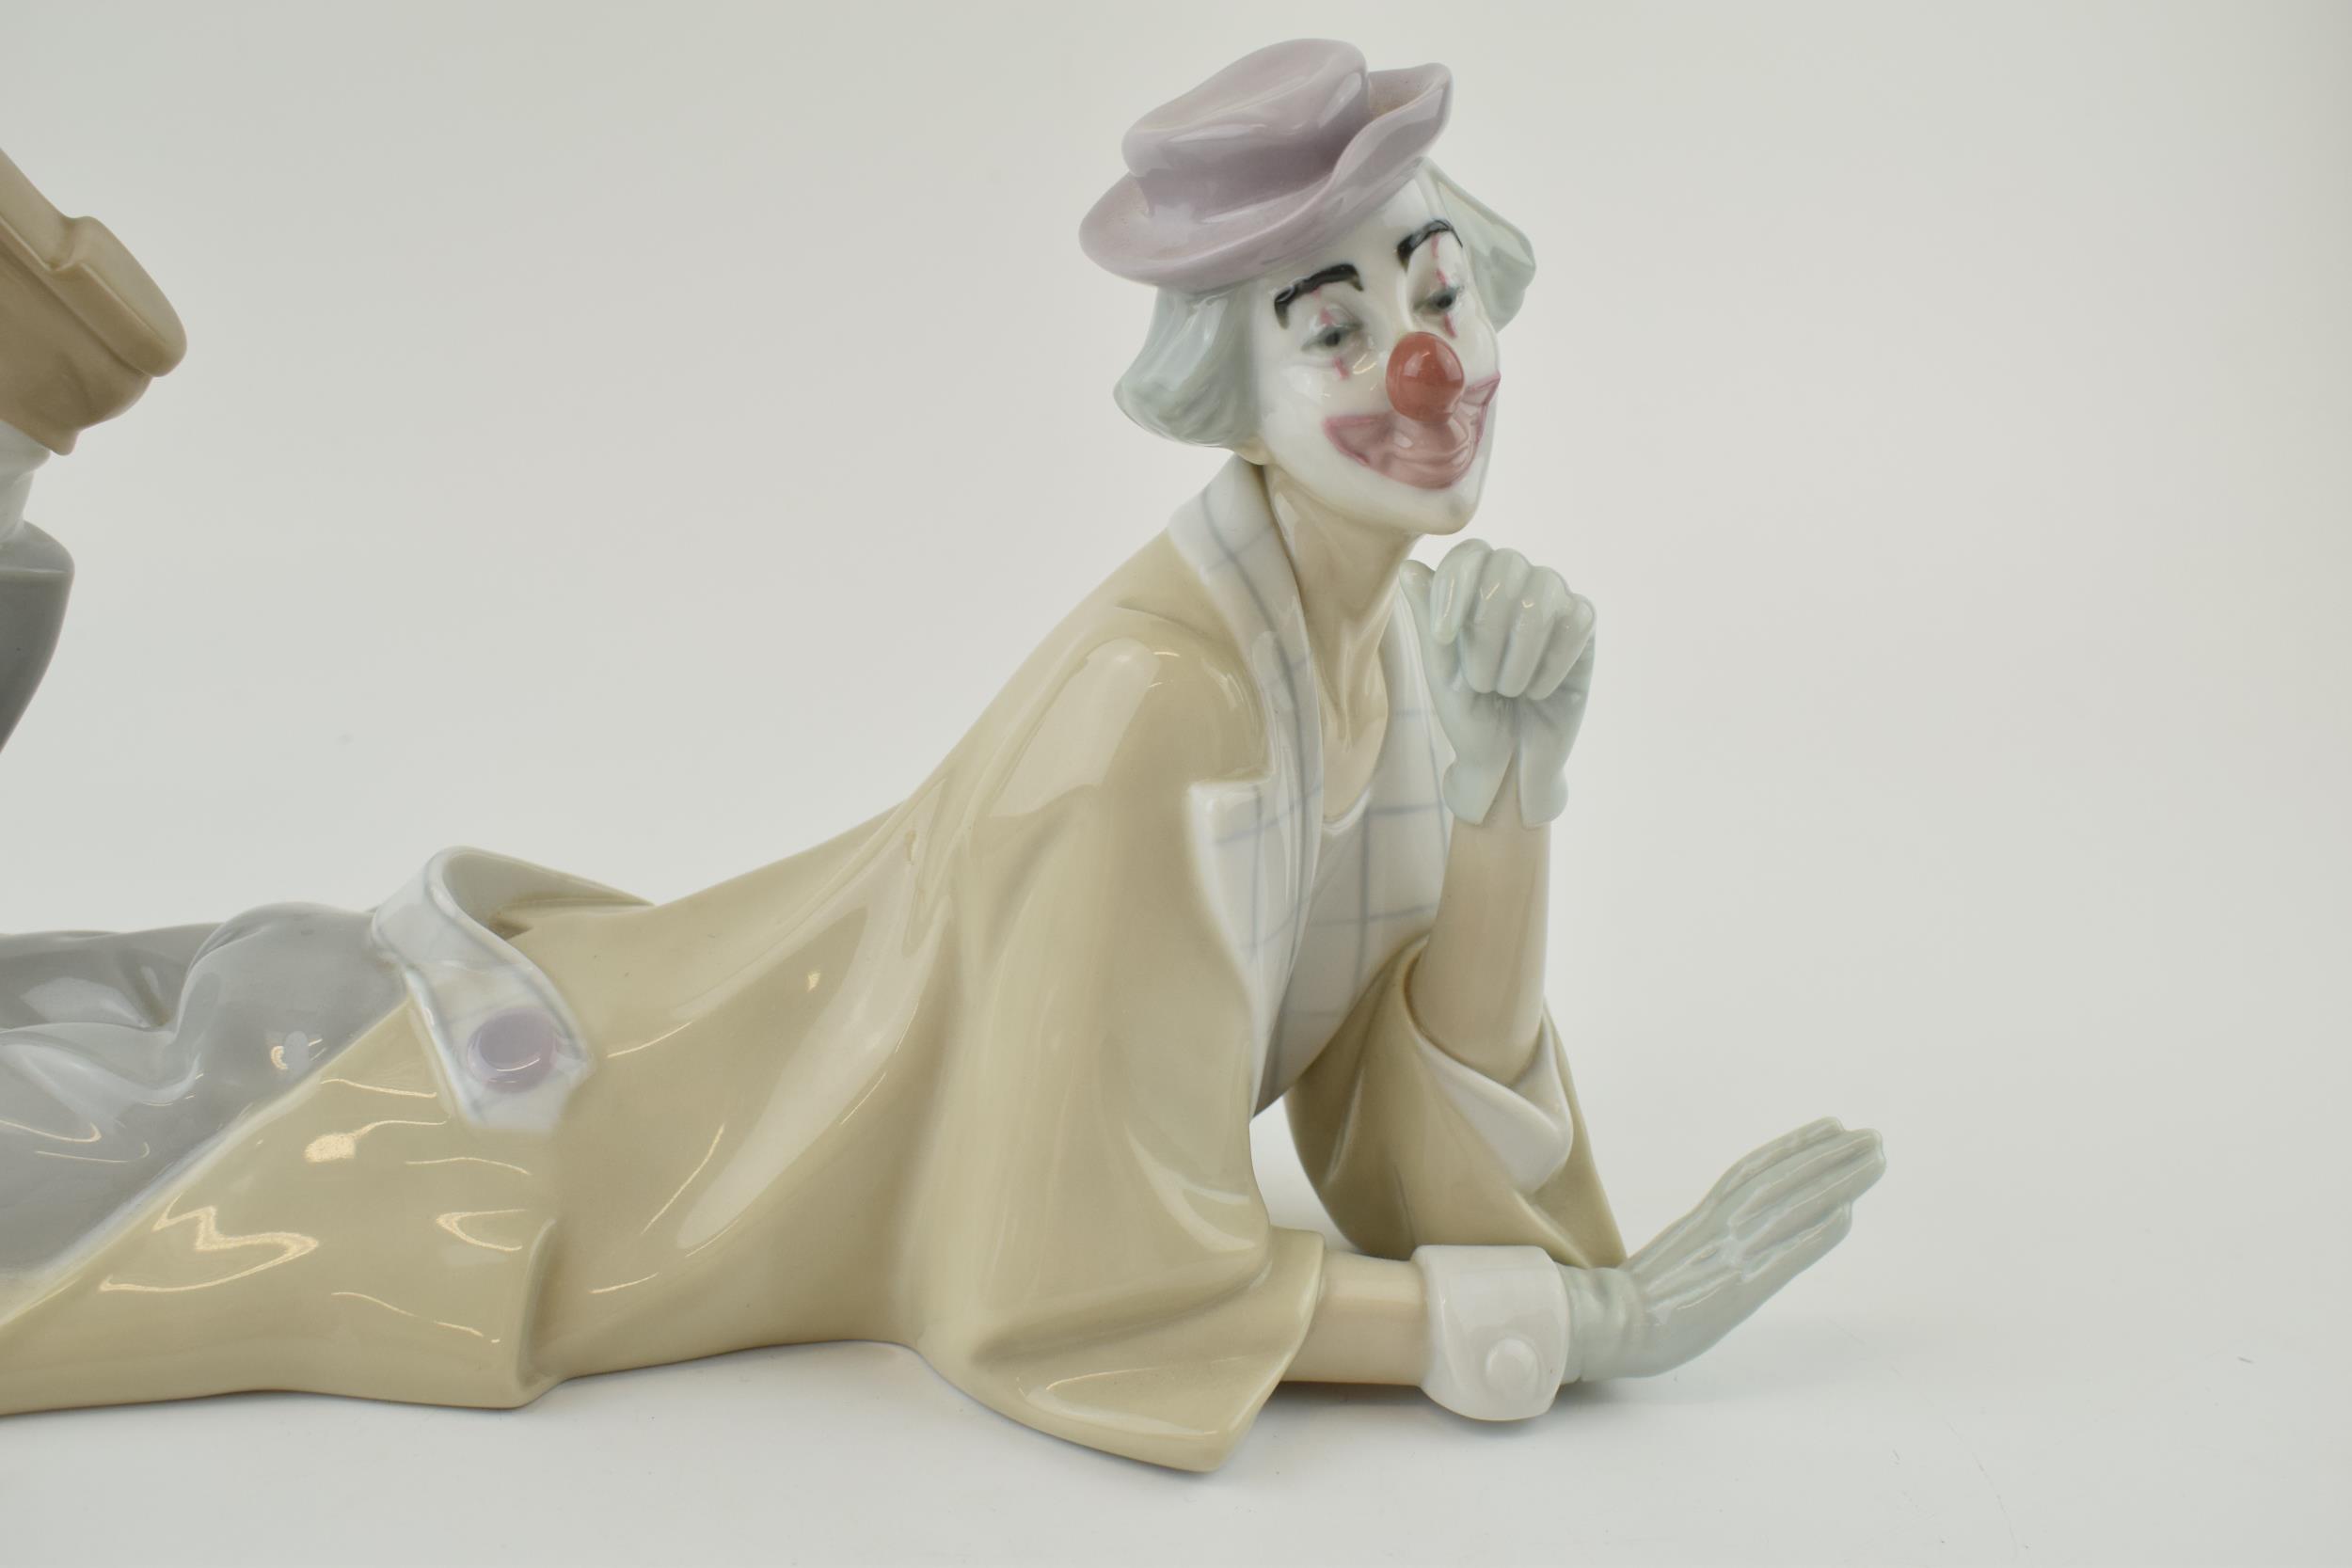 Large Lladro clown figurine model no 4618, 15.5cm tall and 37cm. In good condition with no obvious - Image 2 of 3